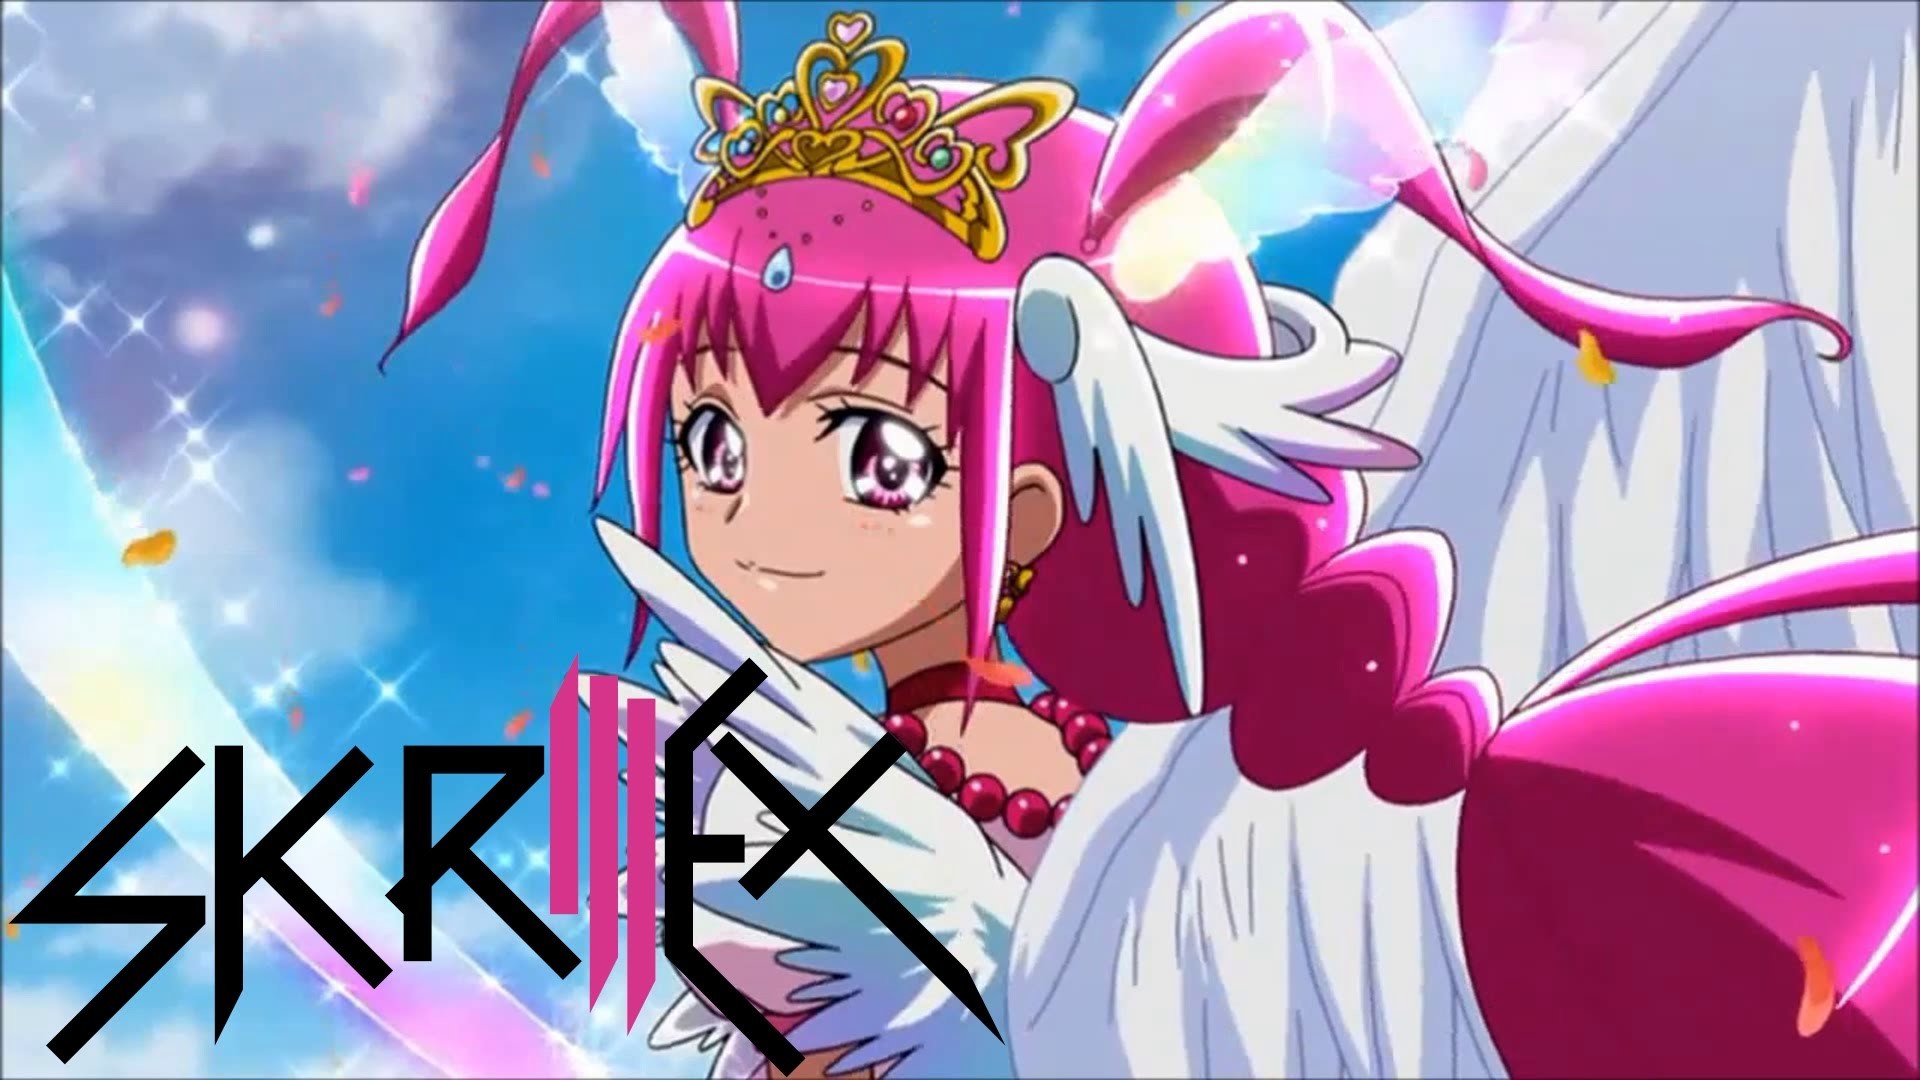 1920x1080 Cure Happy transforms into Ultra Cure Happy while